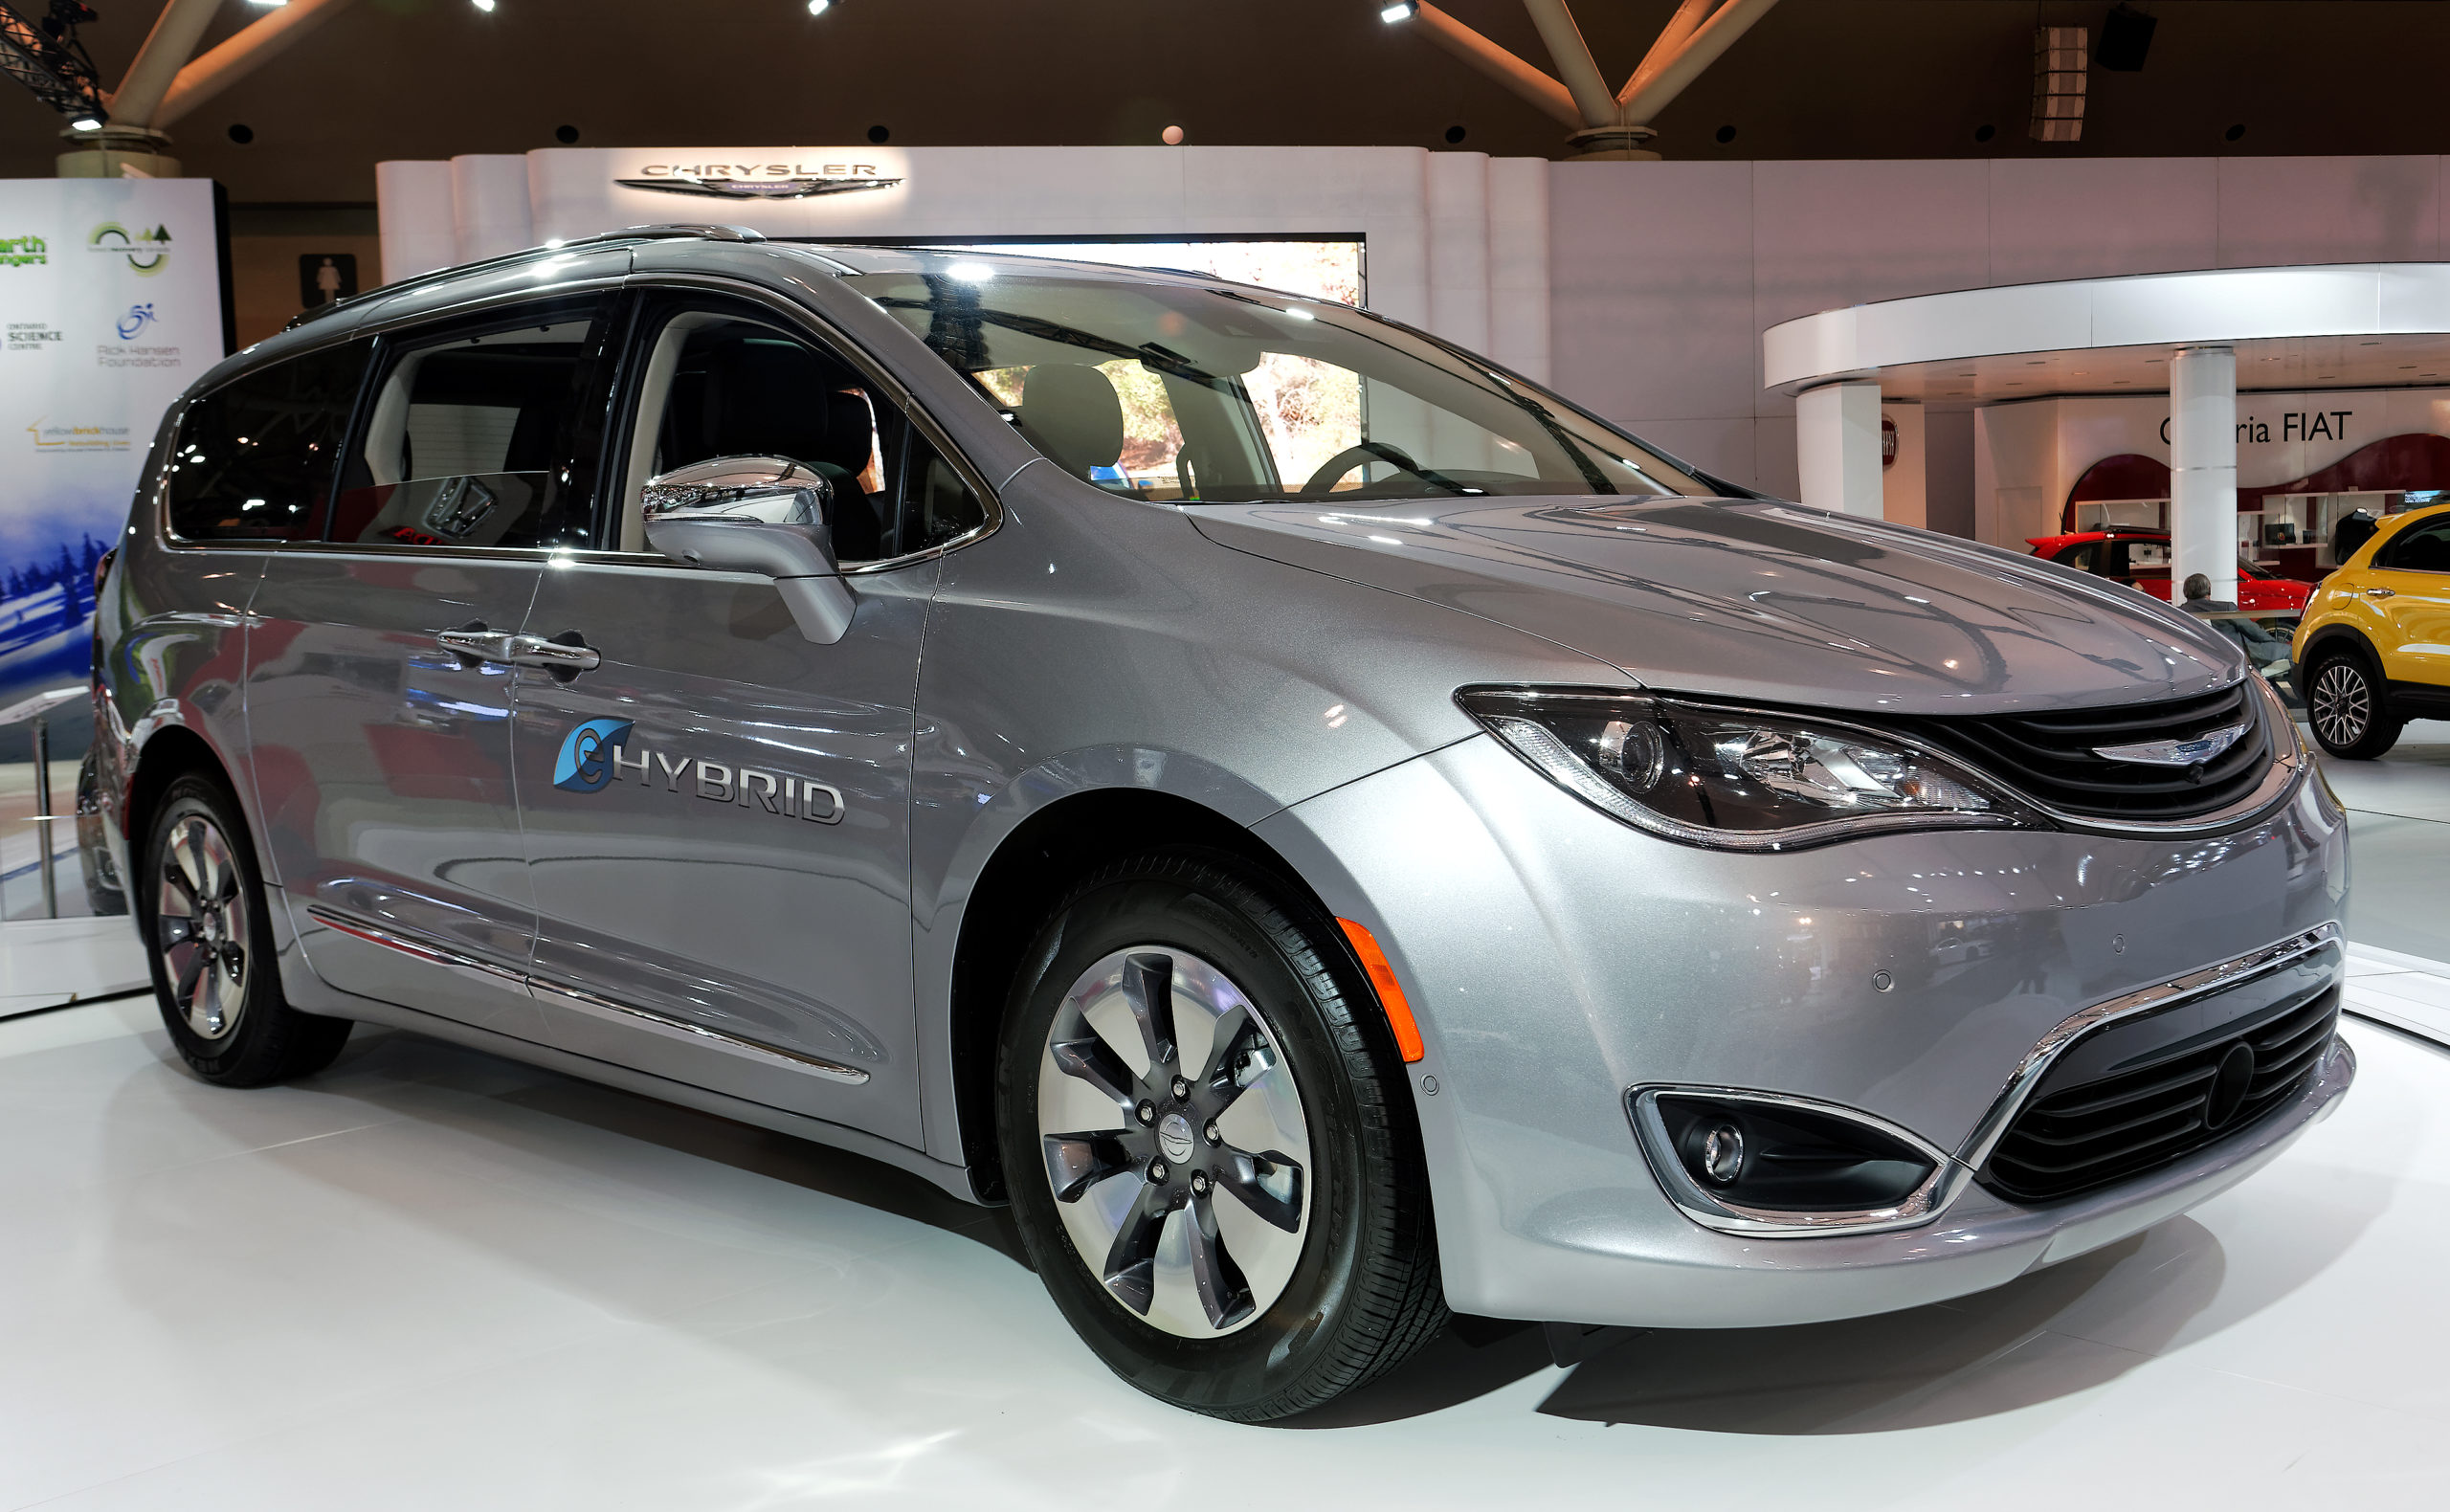 Chrysler Pacifica Recall Issued Due to Rear View Camera Problems That